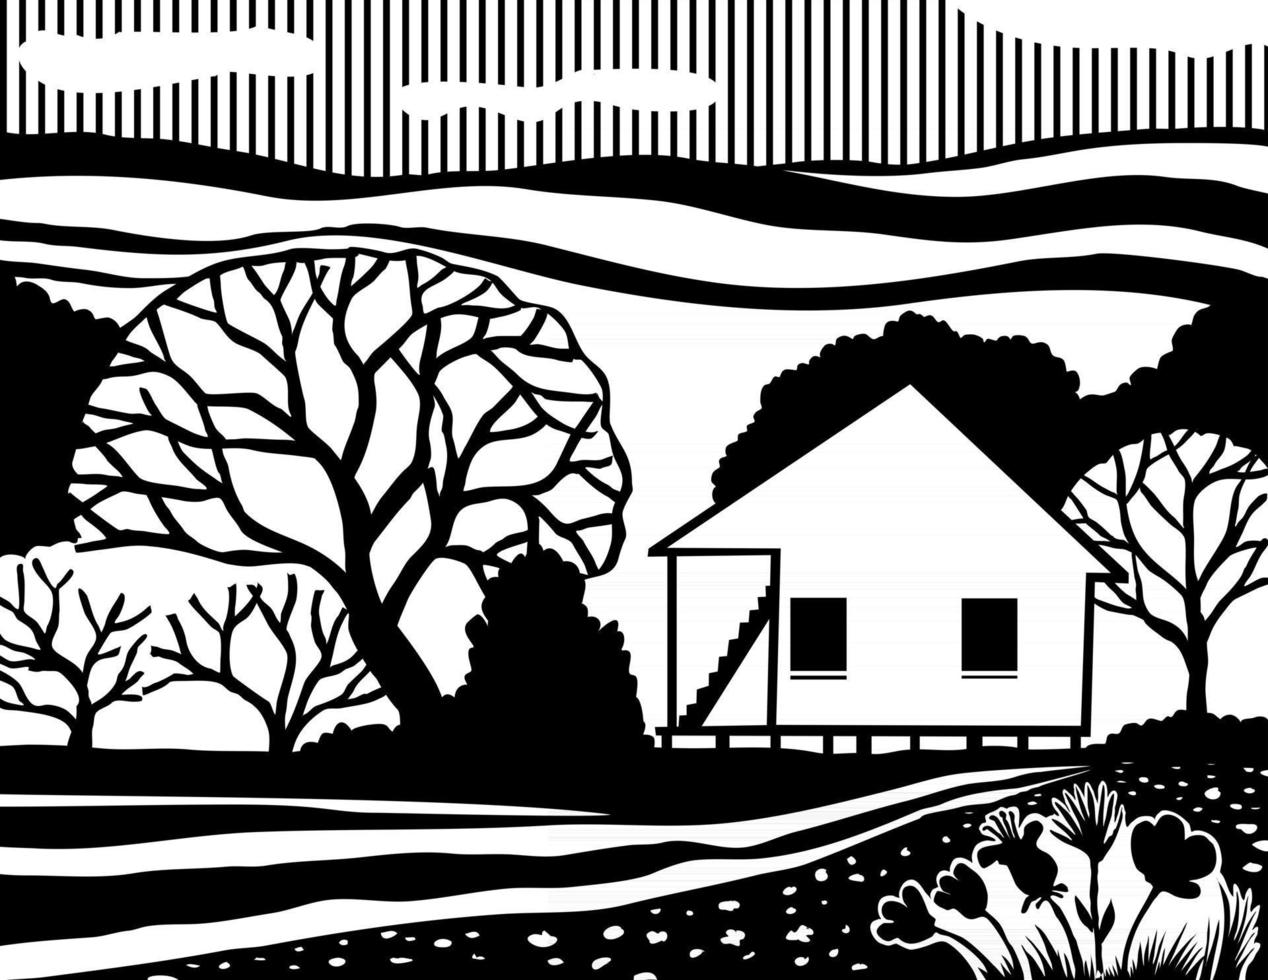 Cajun House Creole Cottage or Acadian Style Dwelling or Architecture in Black and White Retro Stencil Style vector